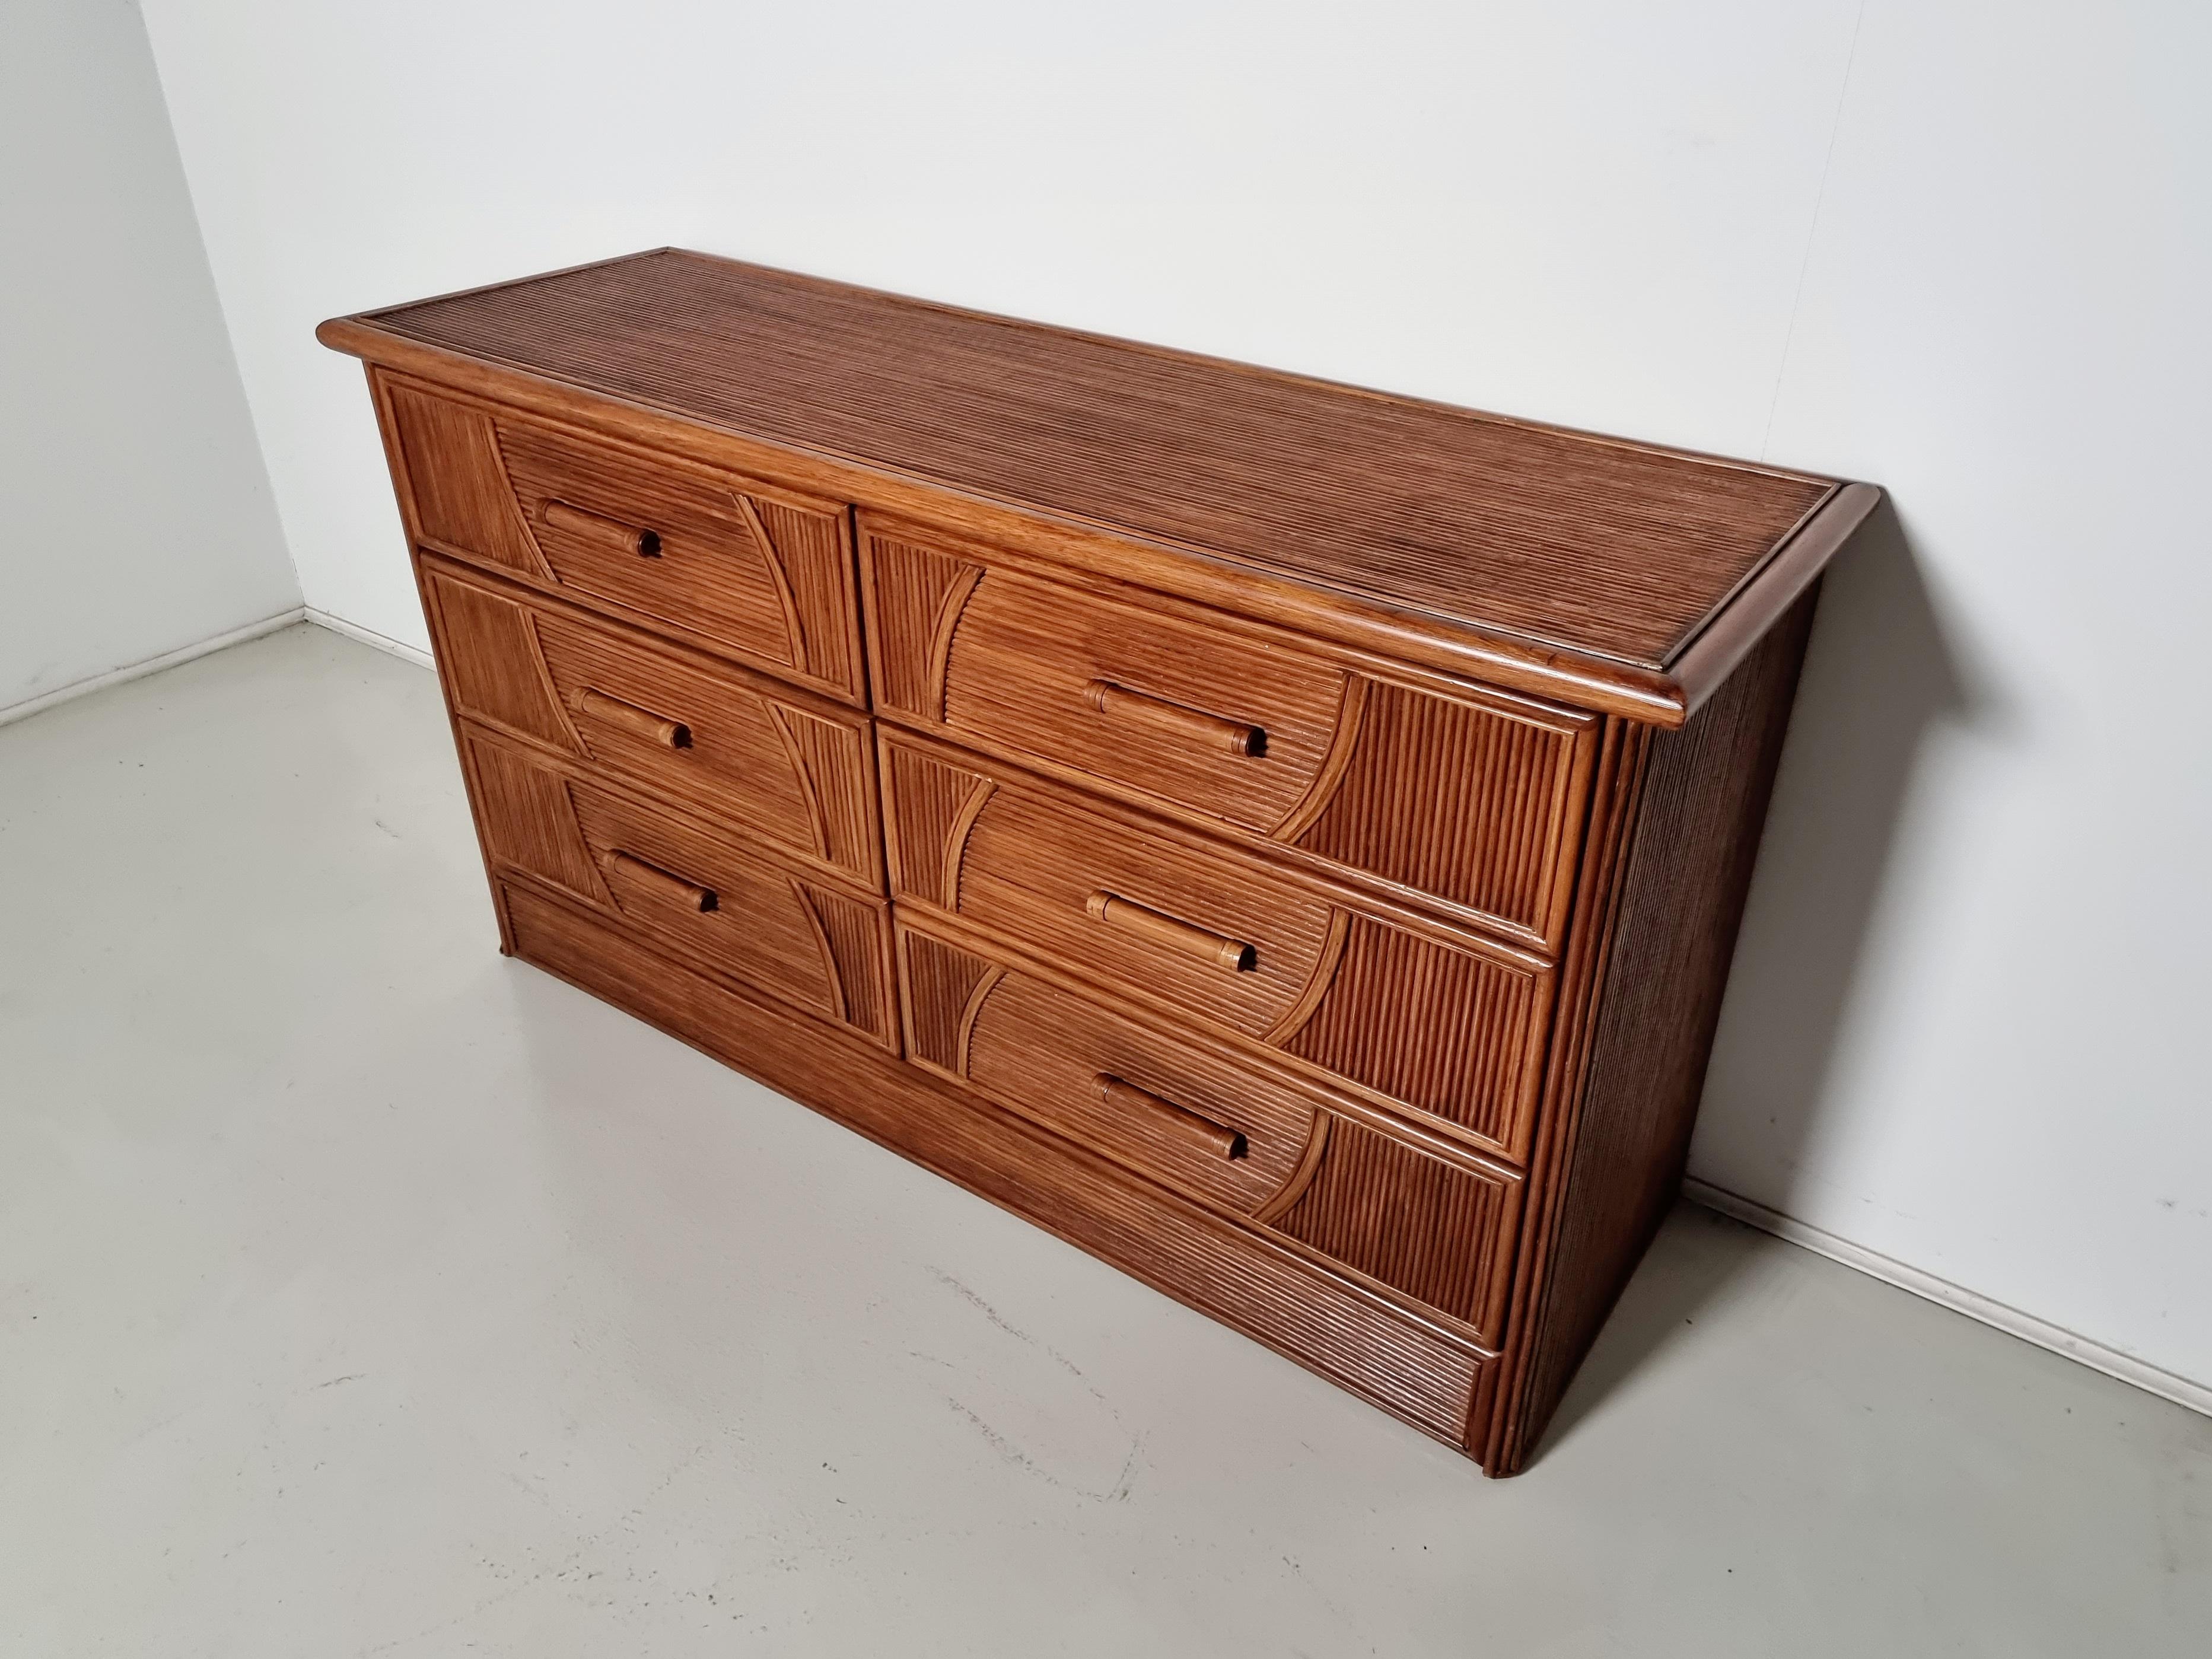 European Walnut veneer Dresser with Matching Mirror from Italy, 1970s For Sale